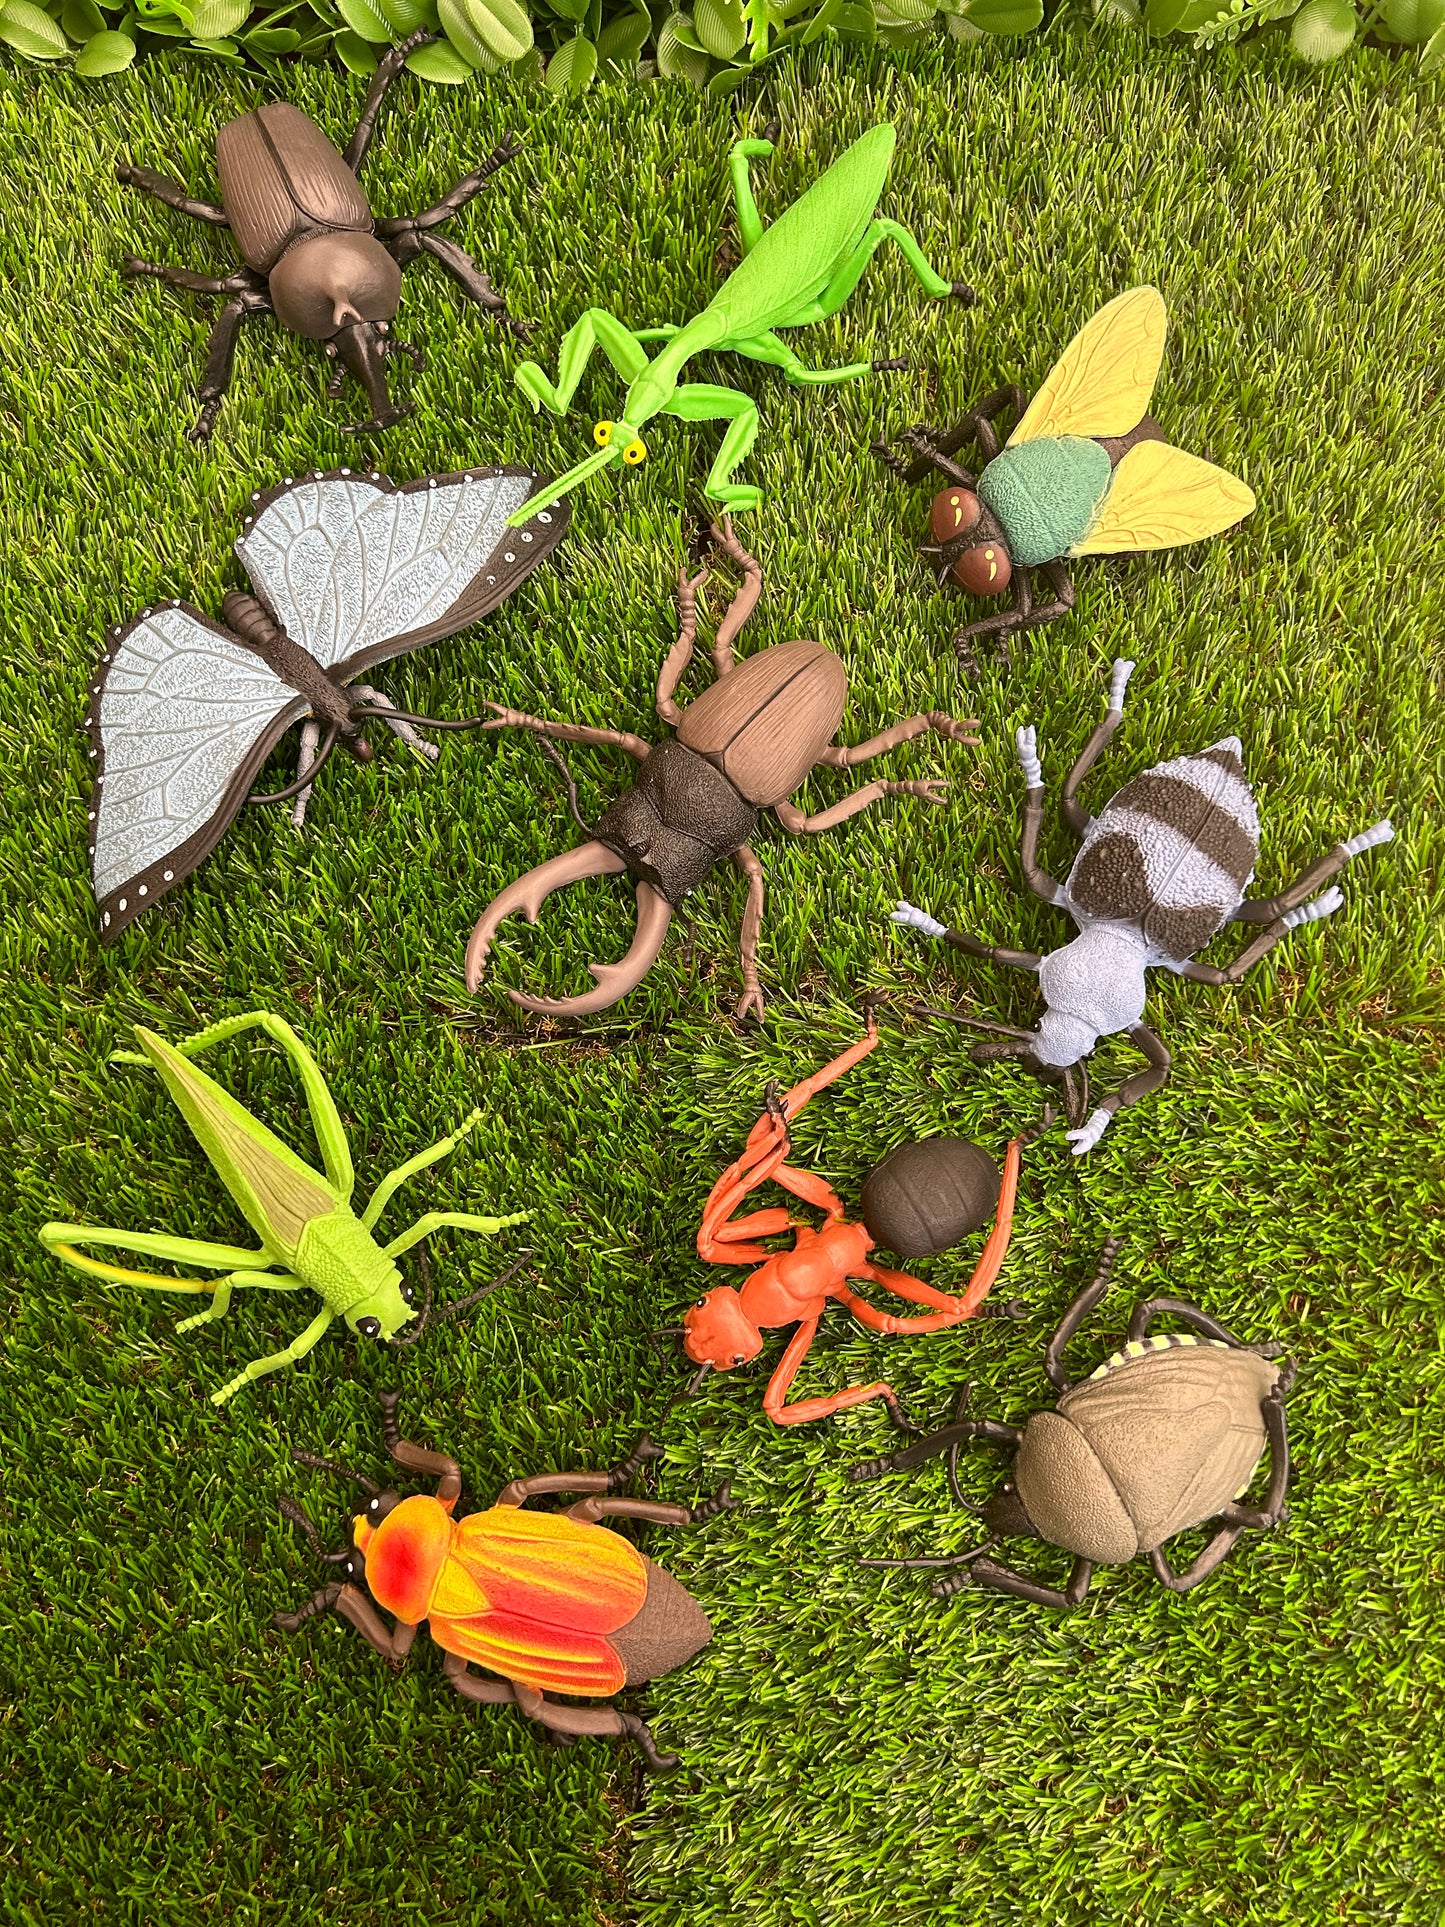 Insect Figurines